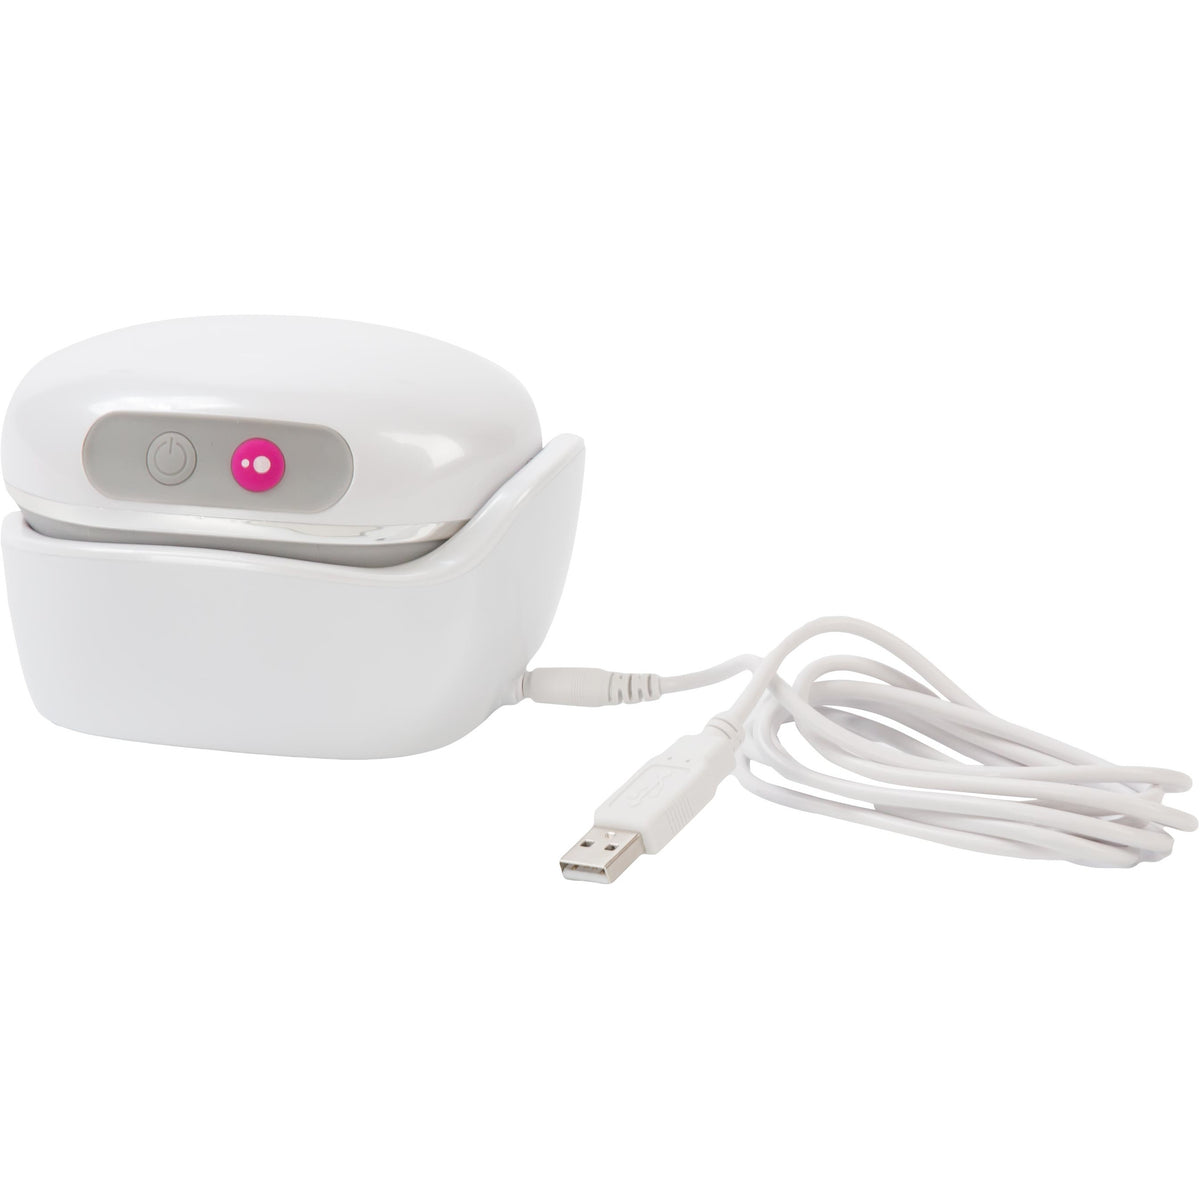 Swan Personal Massage System with USB Charging Cord